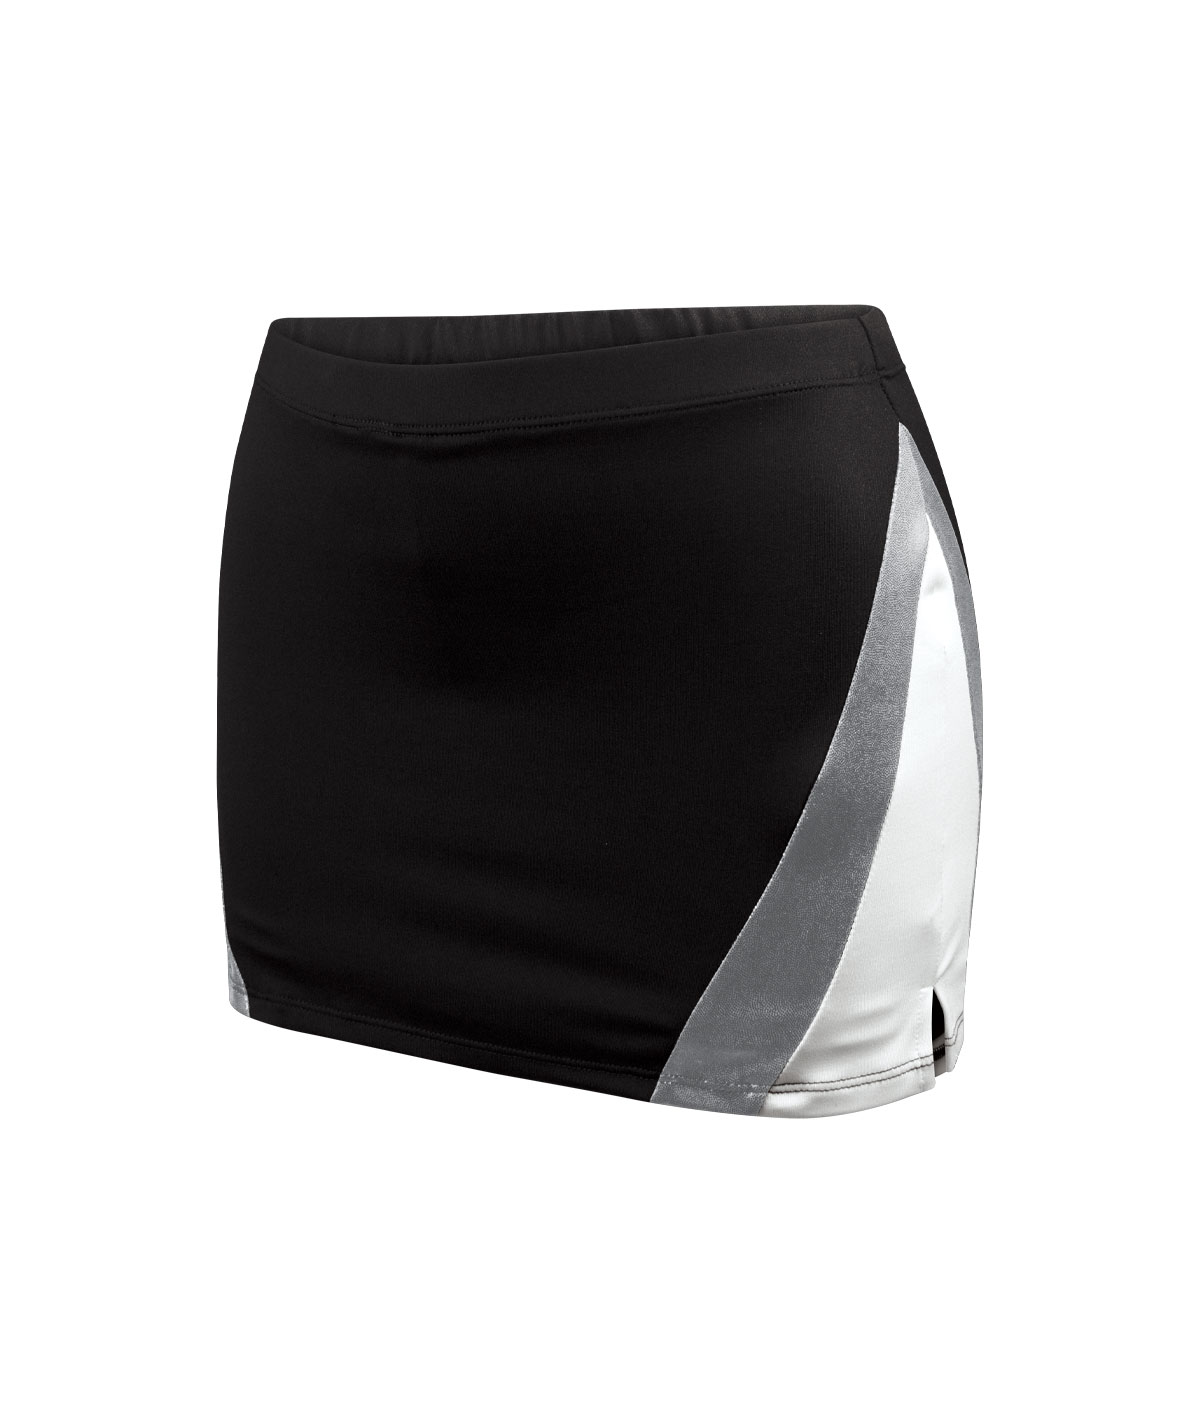 GK All Star Acclaim Famous Skirt With Built-In Brief